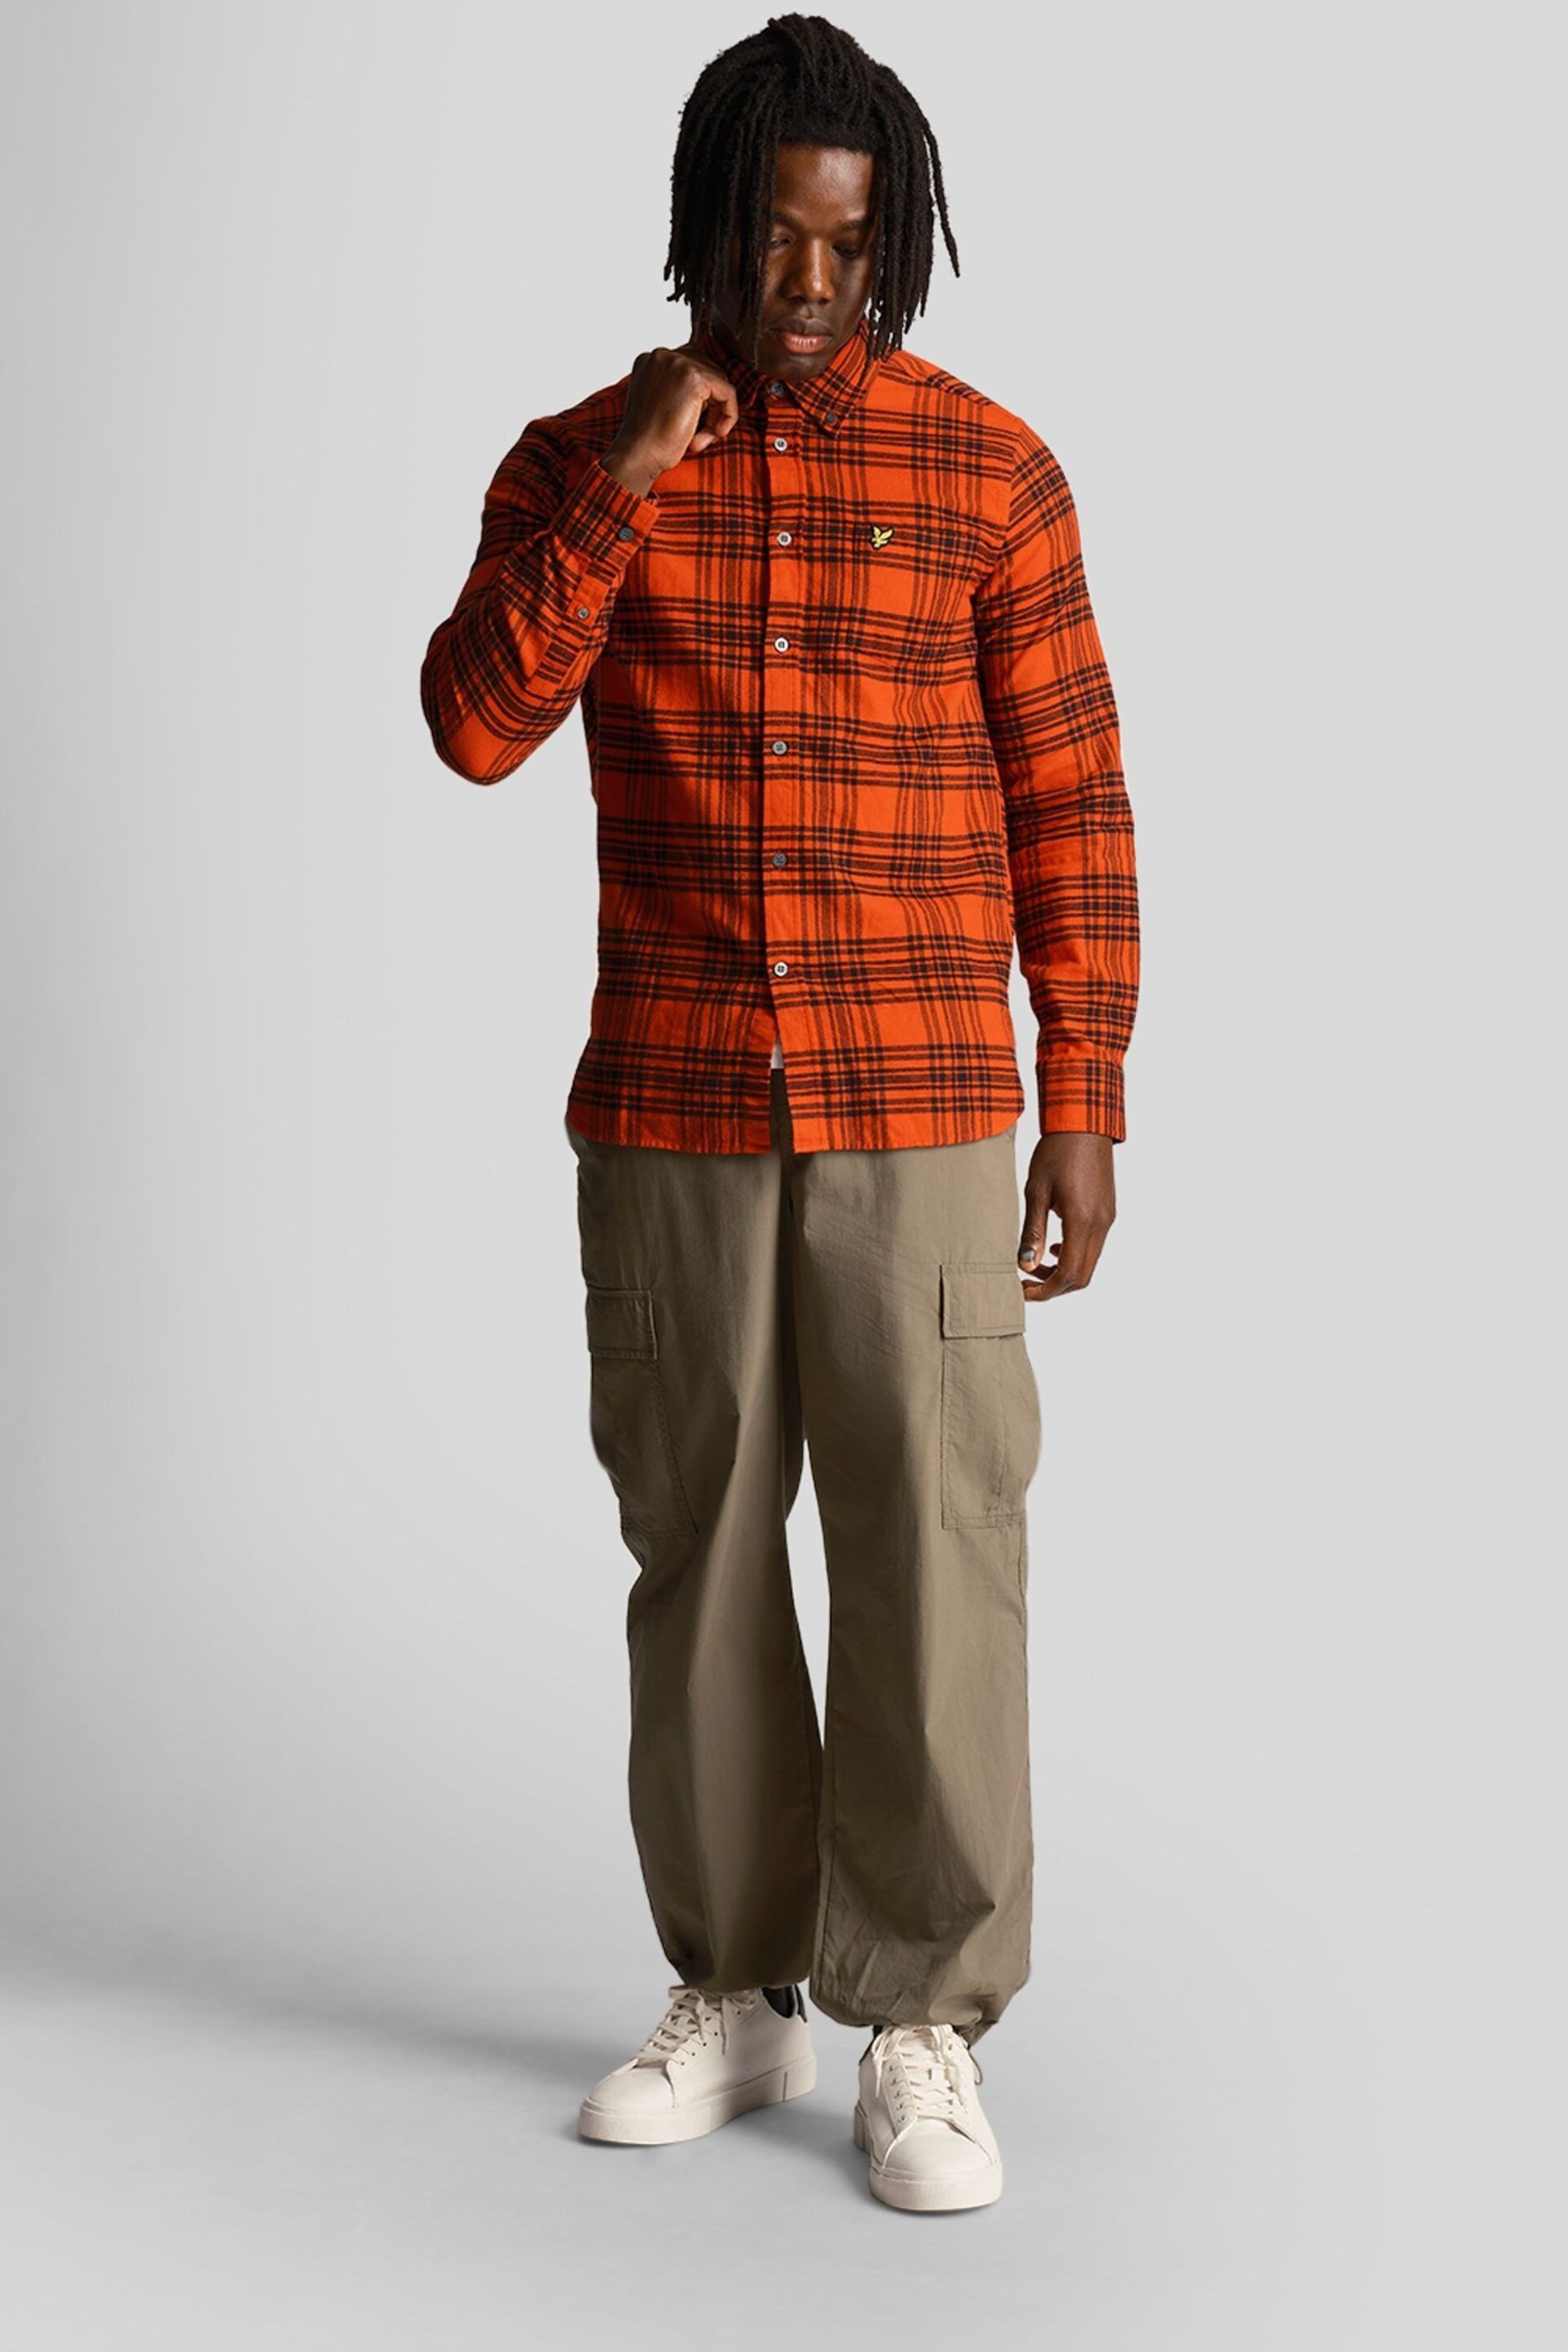 Lyle & Scott Red Check Flannel Shirt - Image 3 of 5